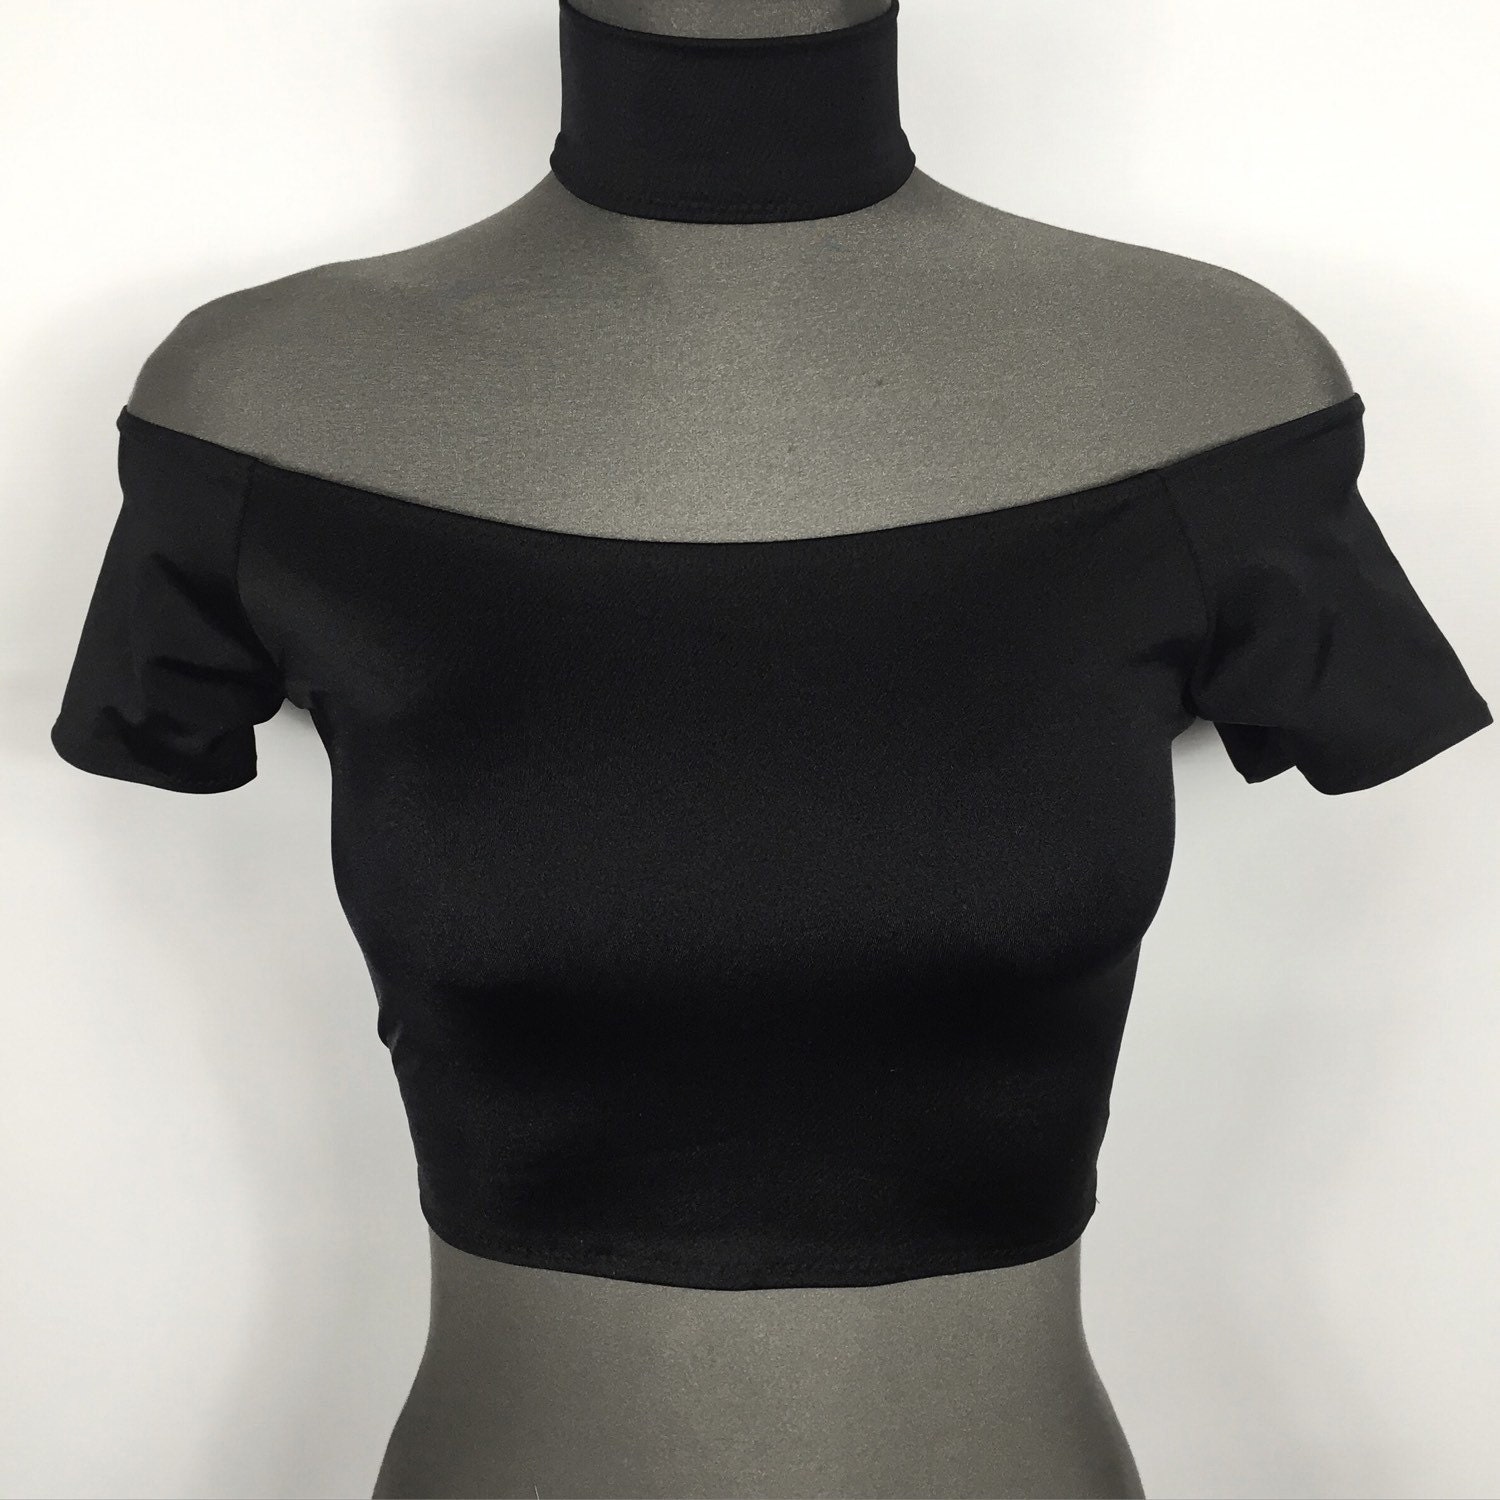 THE GIGI top off the shoulder crop top woth high neck